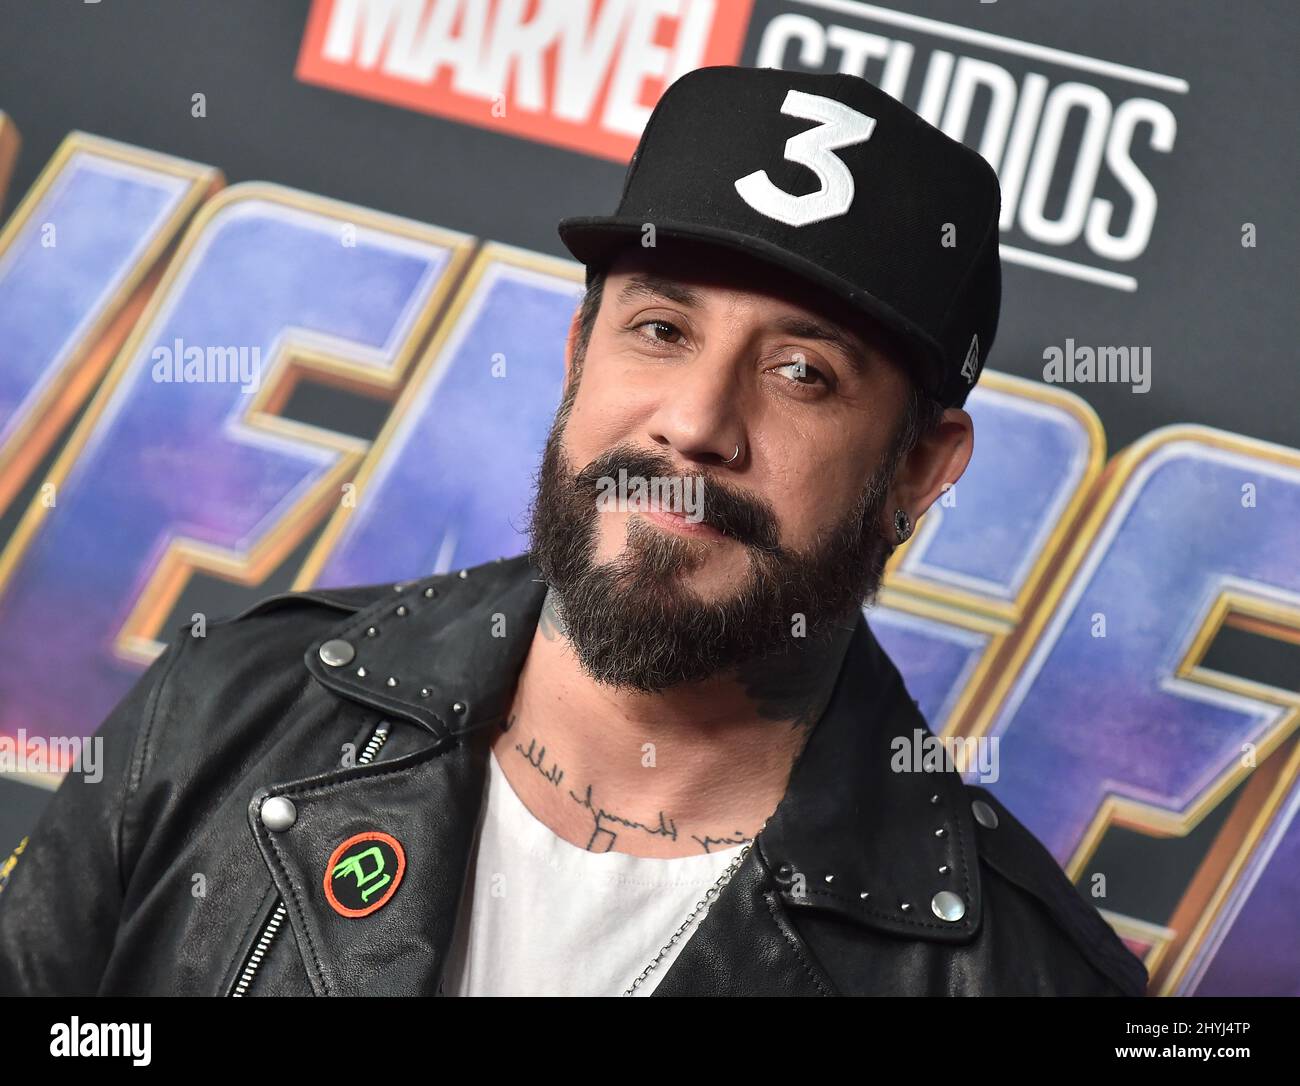 AJ McLean attending the world premiere of Avengers: Endgame held at the LA Convention Centre on April 22, 2019 in Los Angeles, California Stock Photo